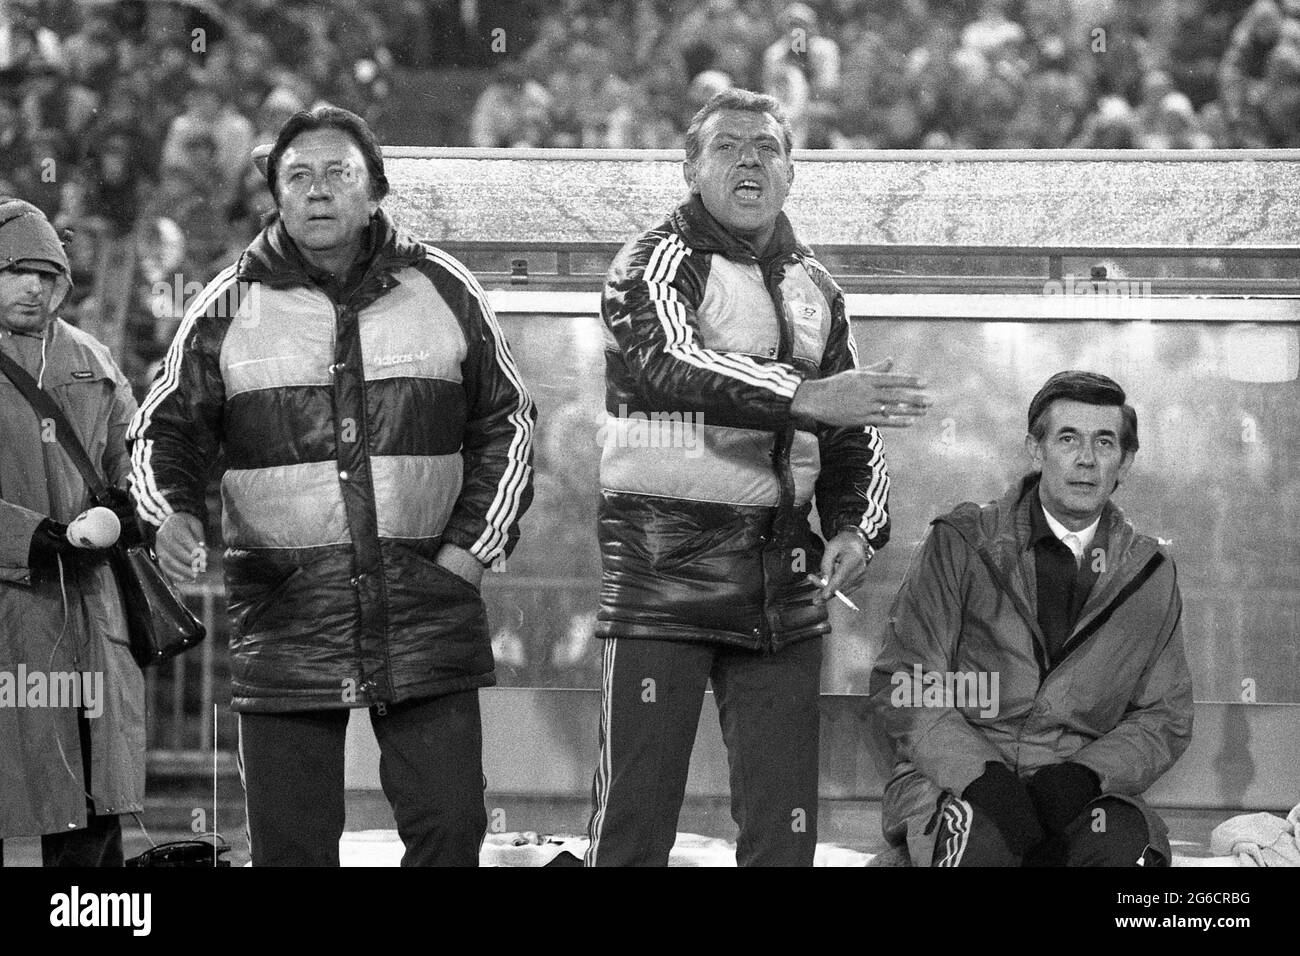 coach Luis MOLOWNY (Real Madrid), withte, gesticulates in front of the coachbank, SW recording, soccer UEFA Cup first leg Borussia Monchengladbach - Real Madrid 5: 1 on November 27, 1985 in the Rheinstadion Duesseldorf, Â Stock Photo